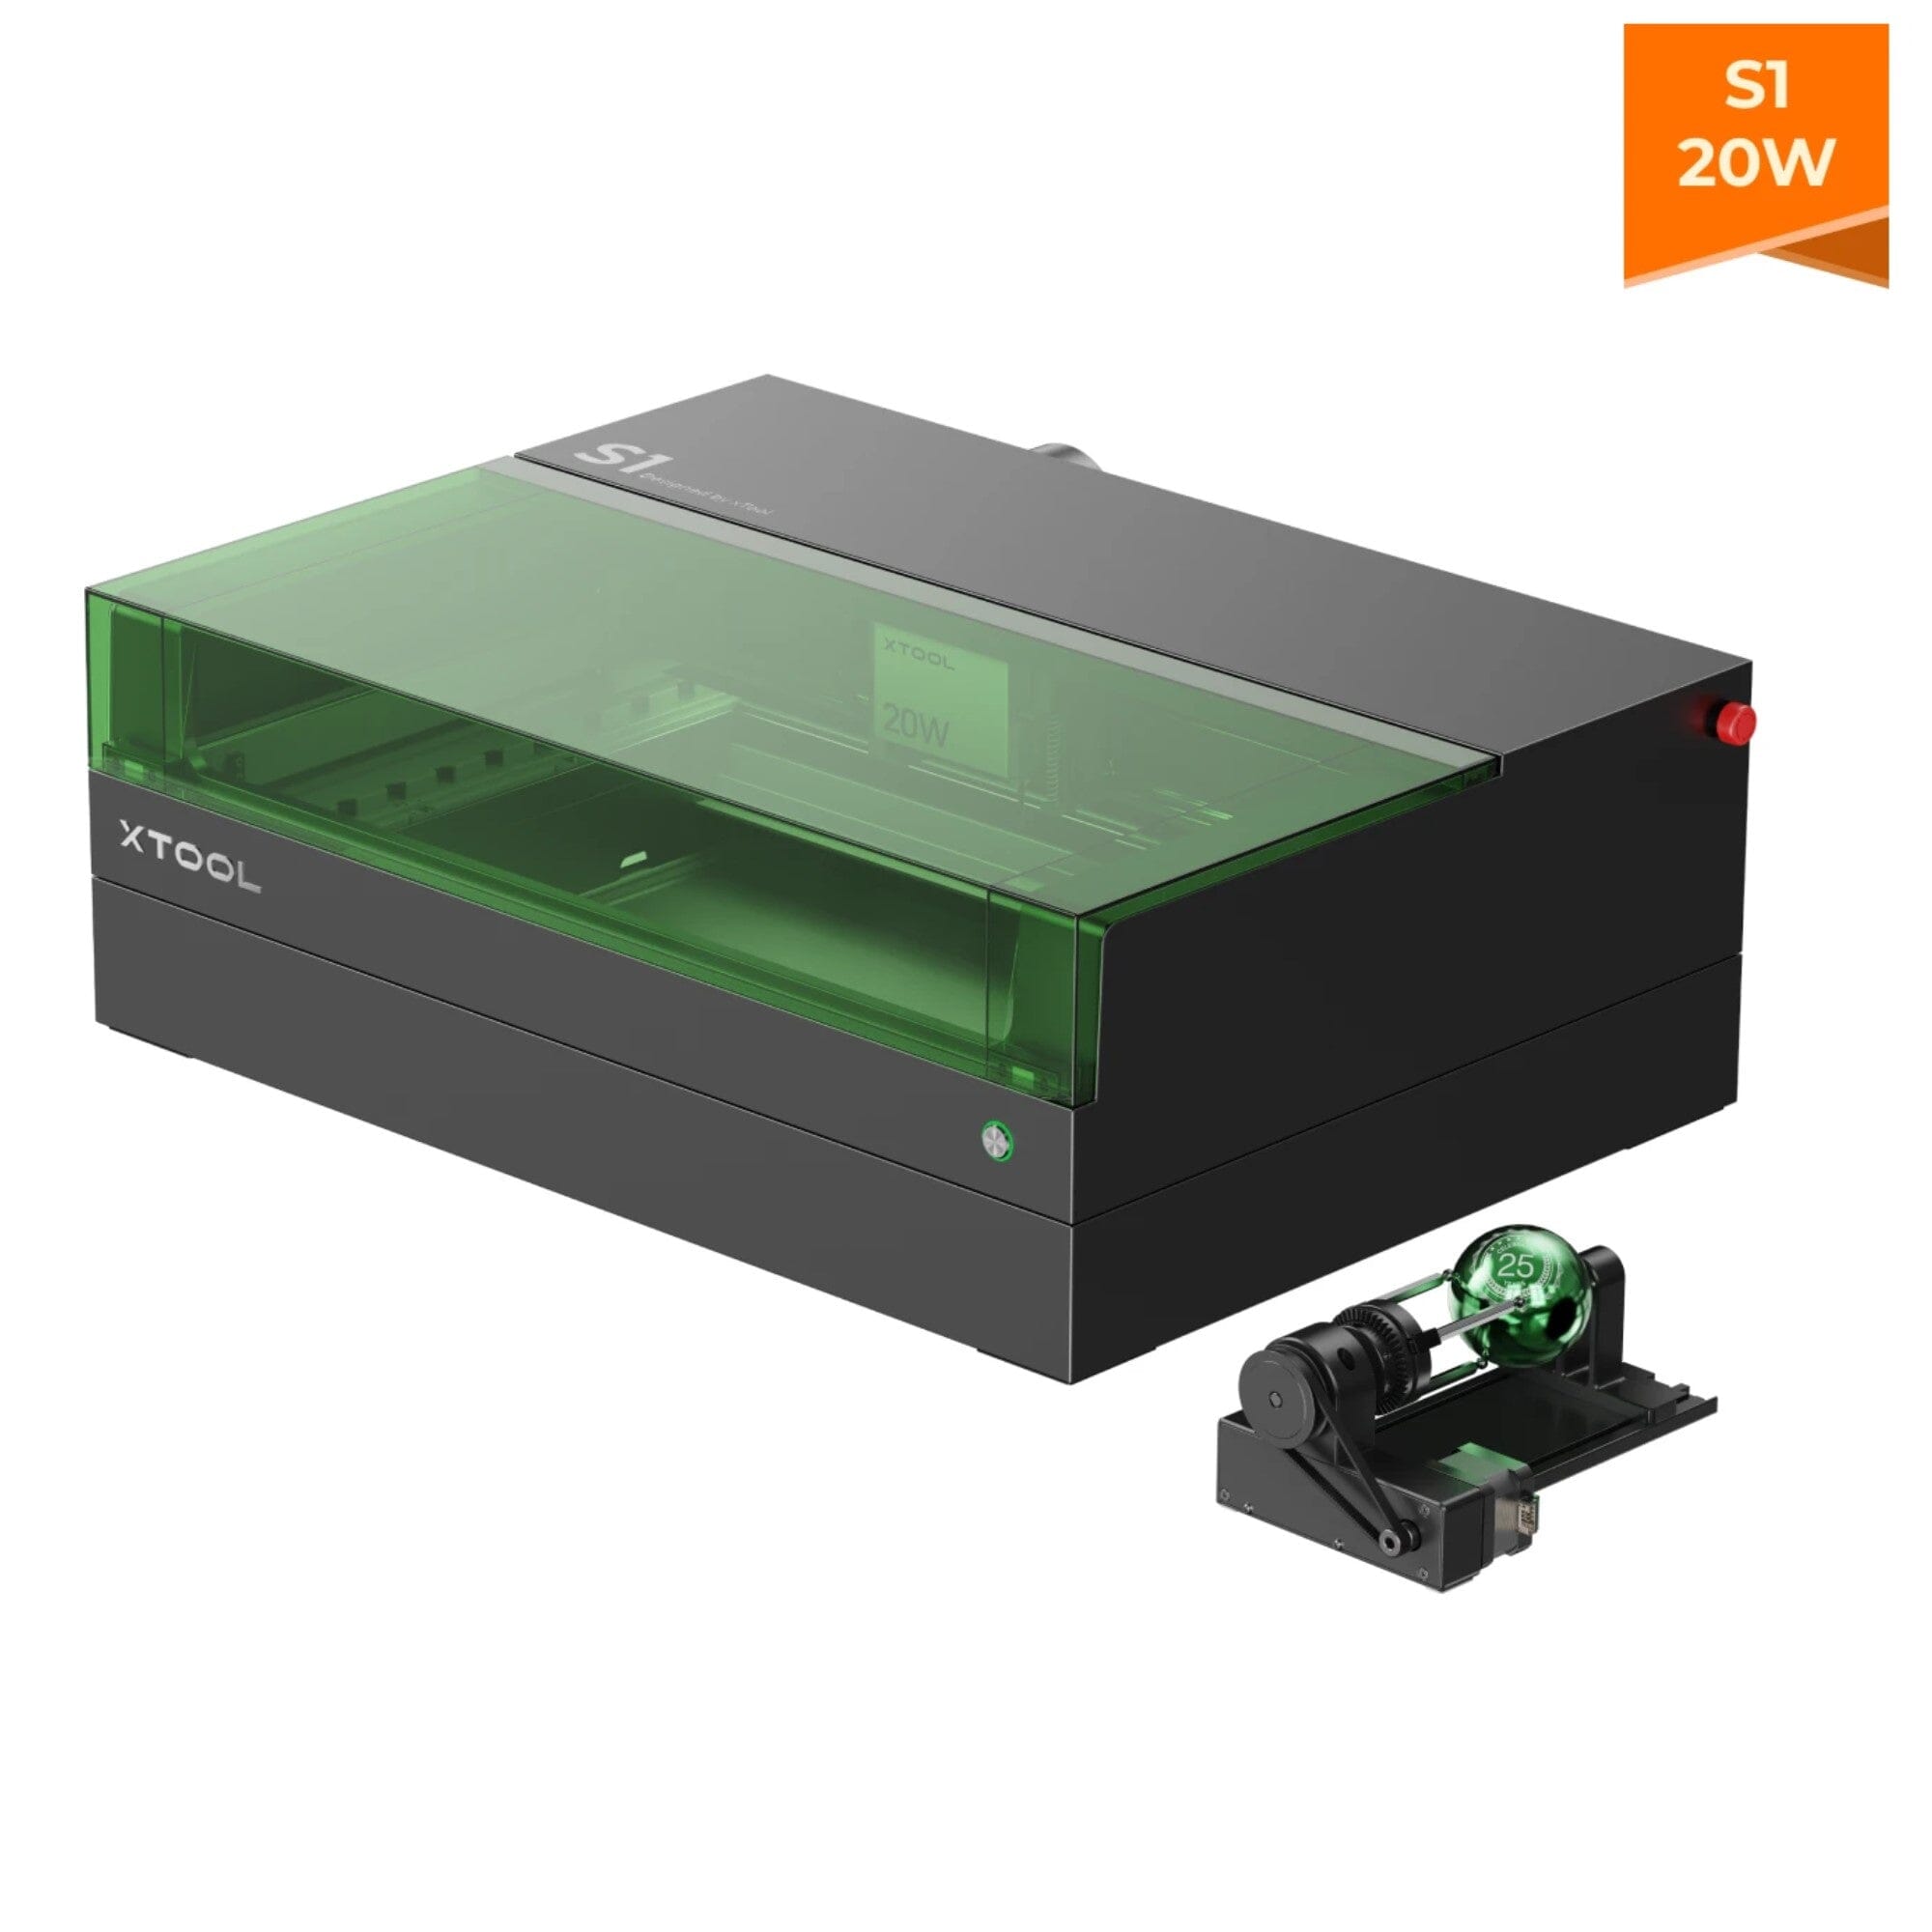 xTool unveils groundbreaking 40W enclosed diode laser cutter: A game  changer in the laser cutting market? - The Gadgeteer